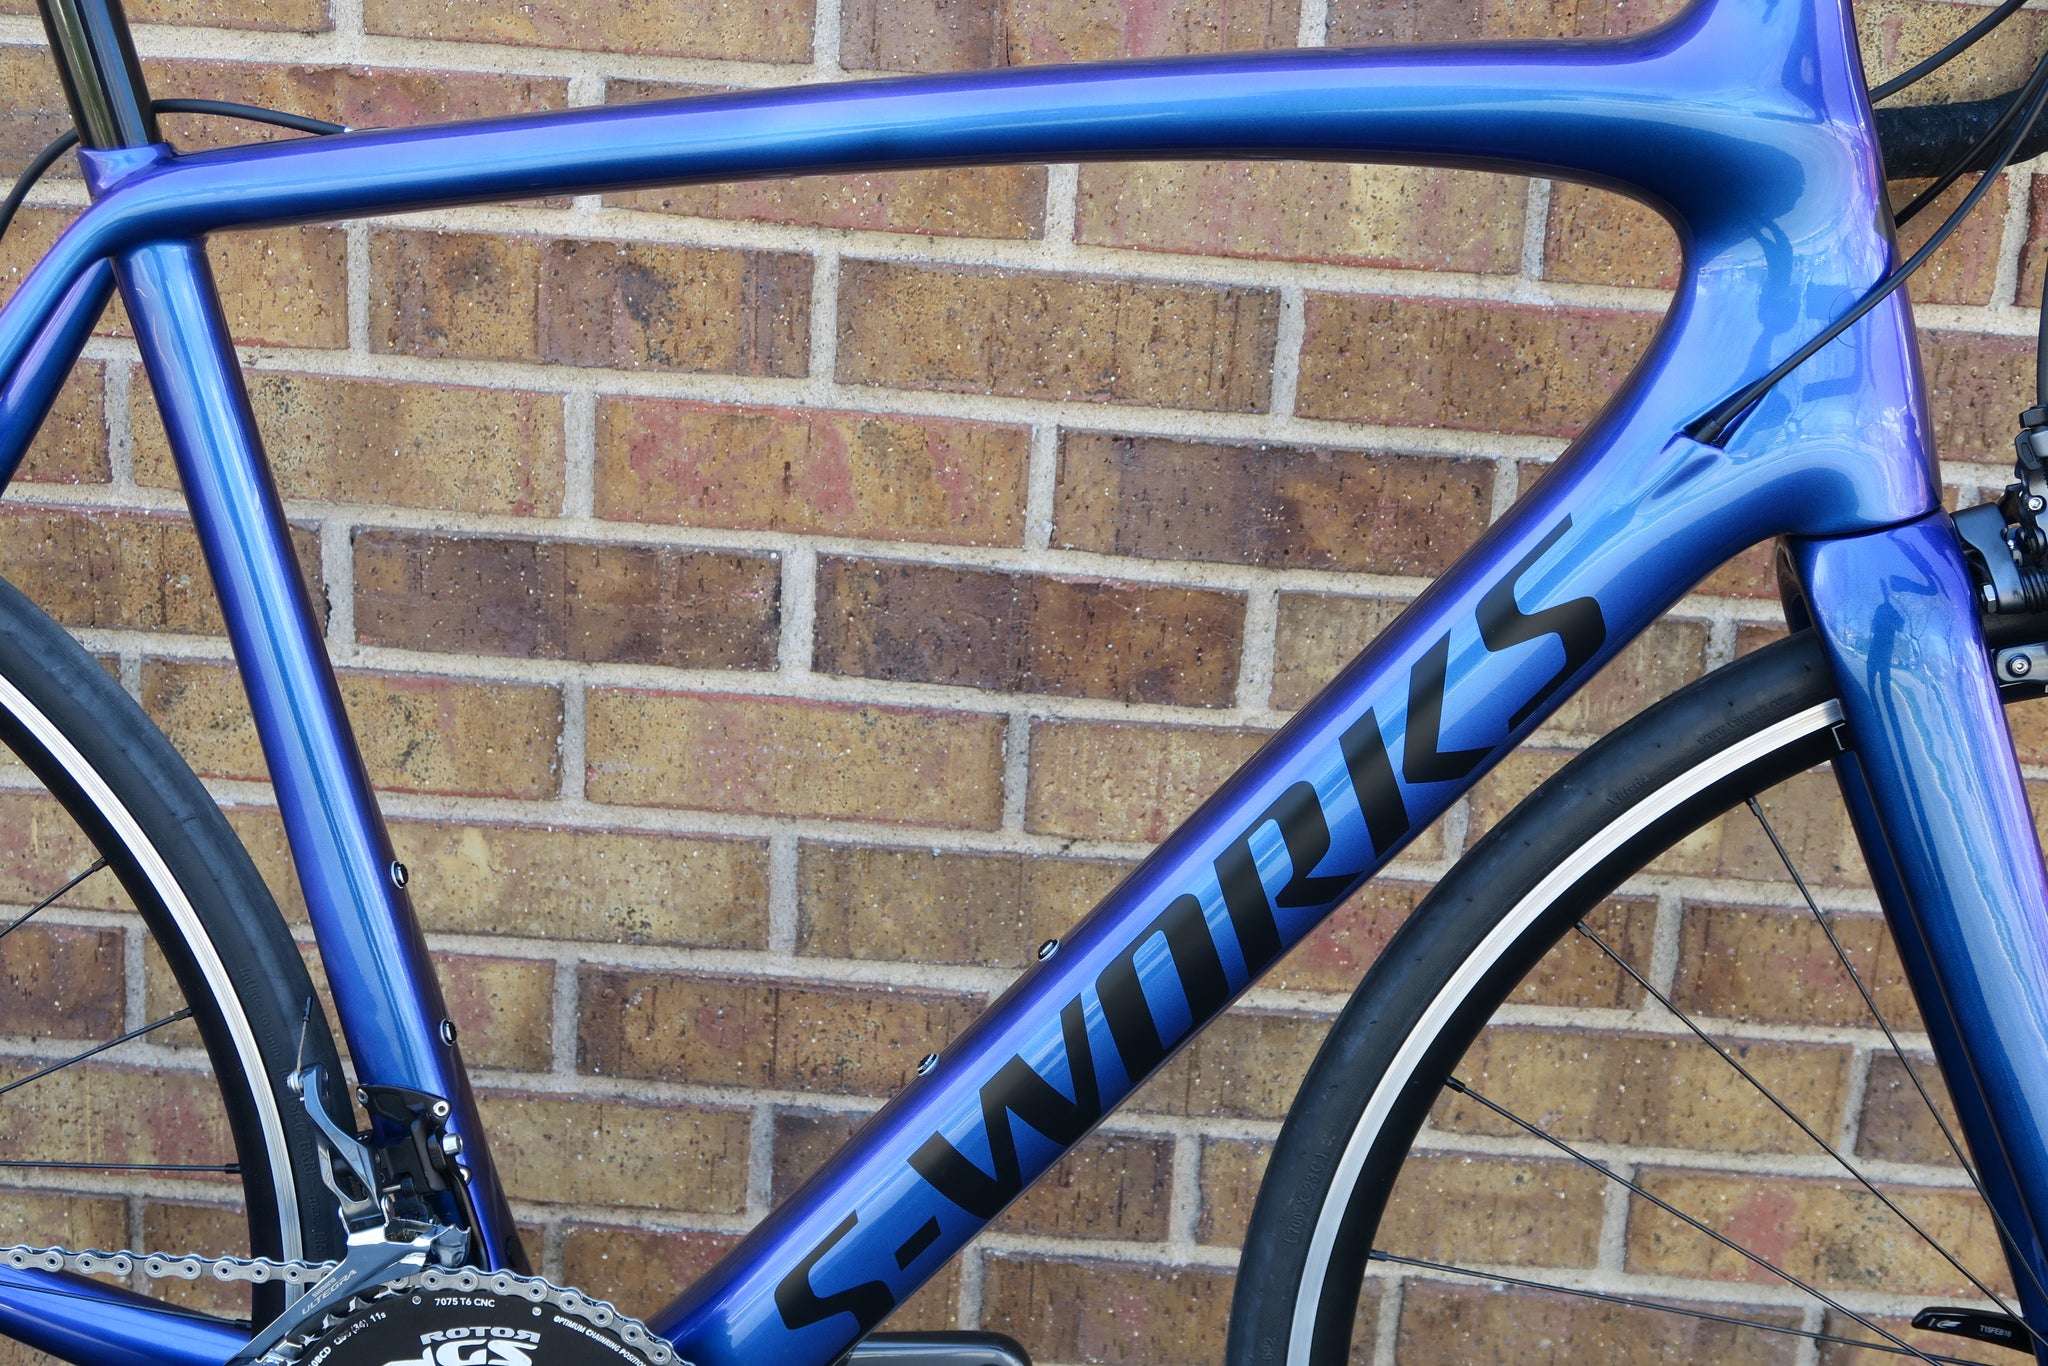 2016 S-WORKS TARMAC CARBON LIMITED EDITION CHAMELEON